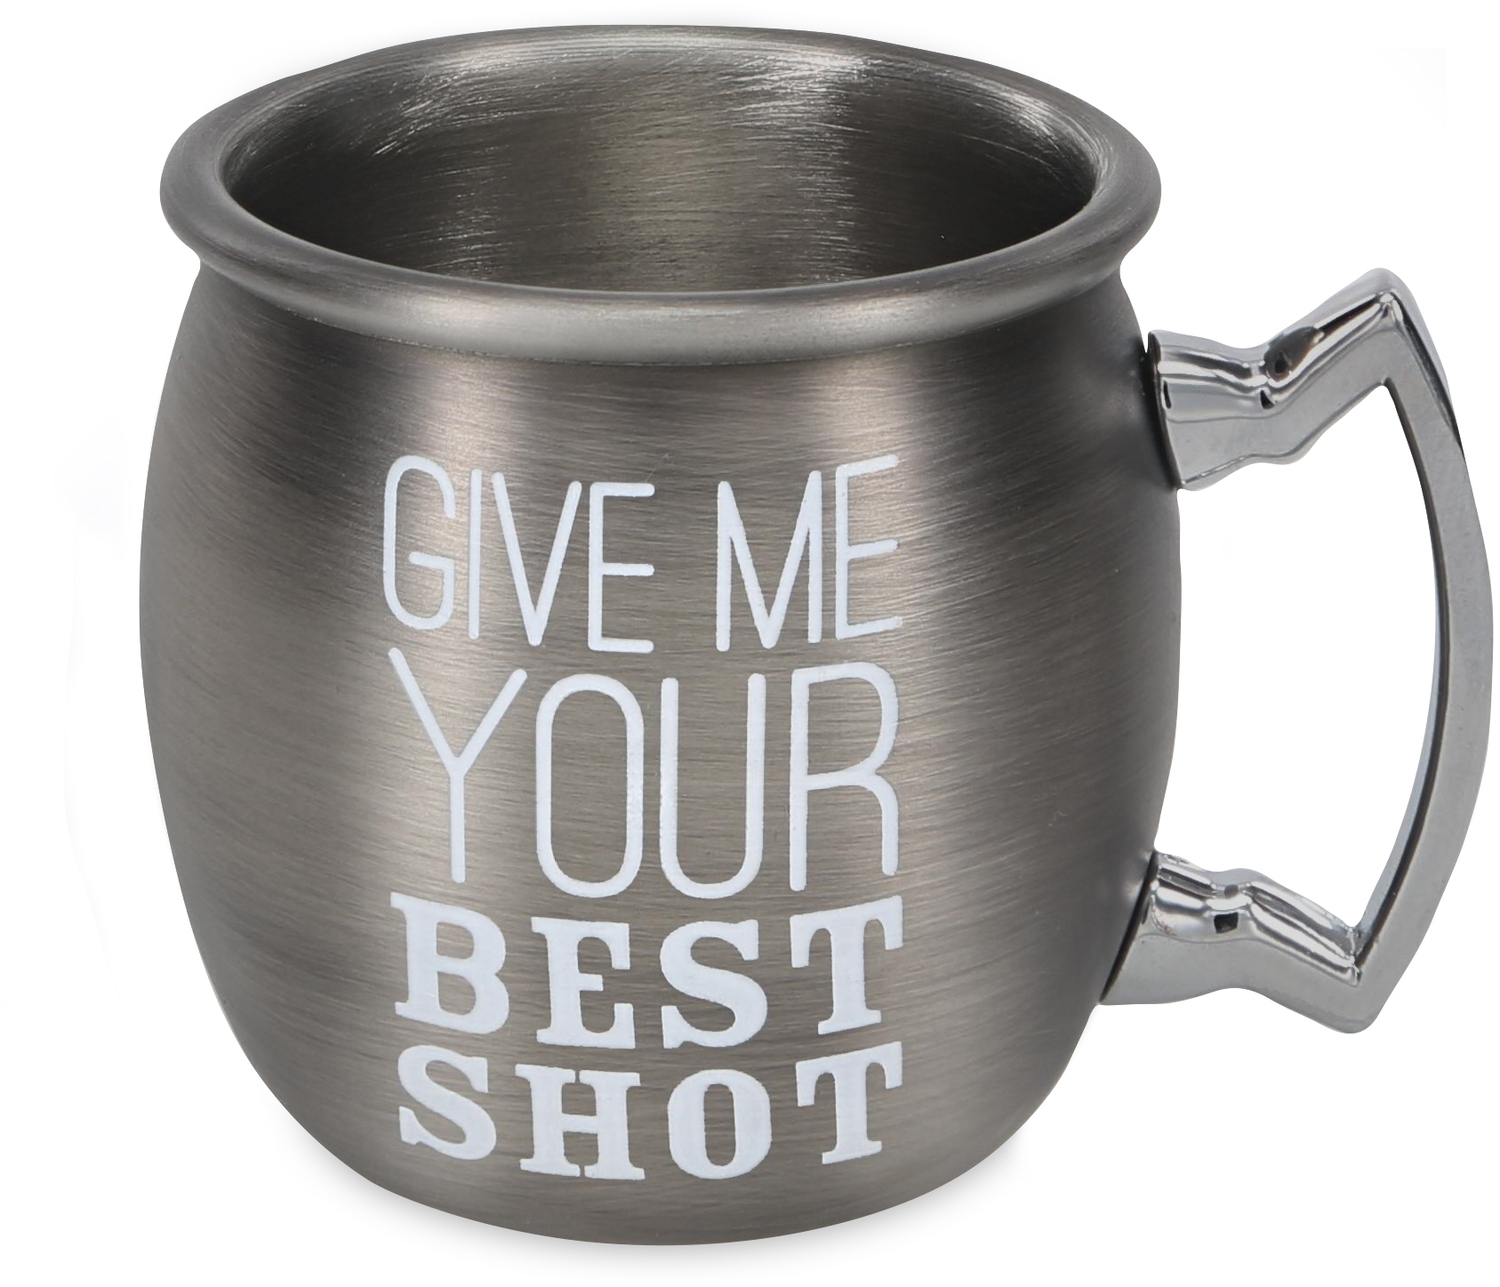 Best Shot by Man Crafted - Best Shot - 2 oz Stainless Steel Moscow Mule Shot